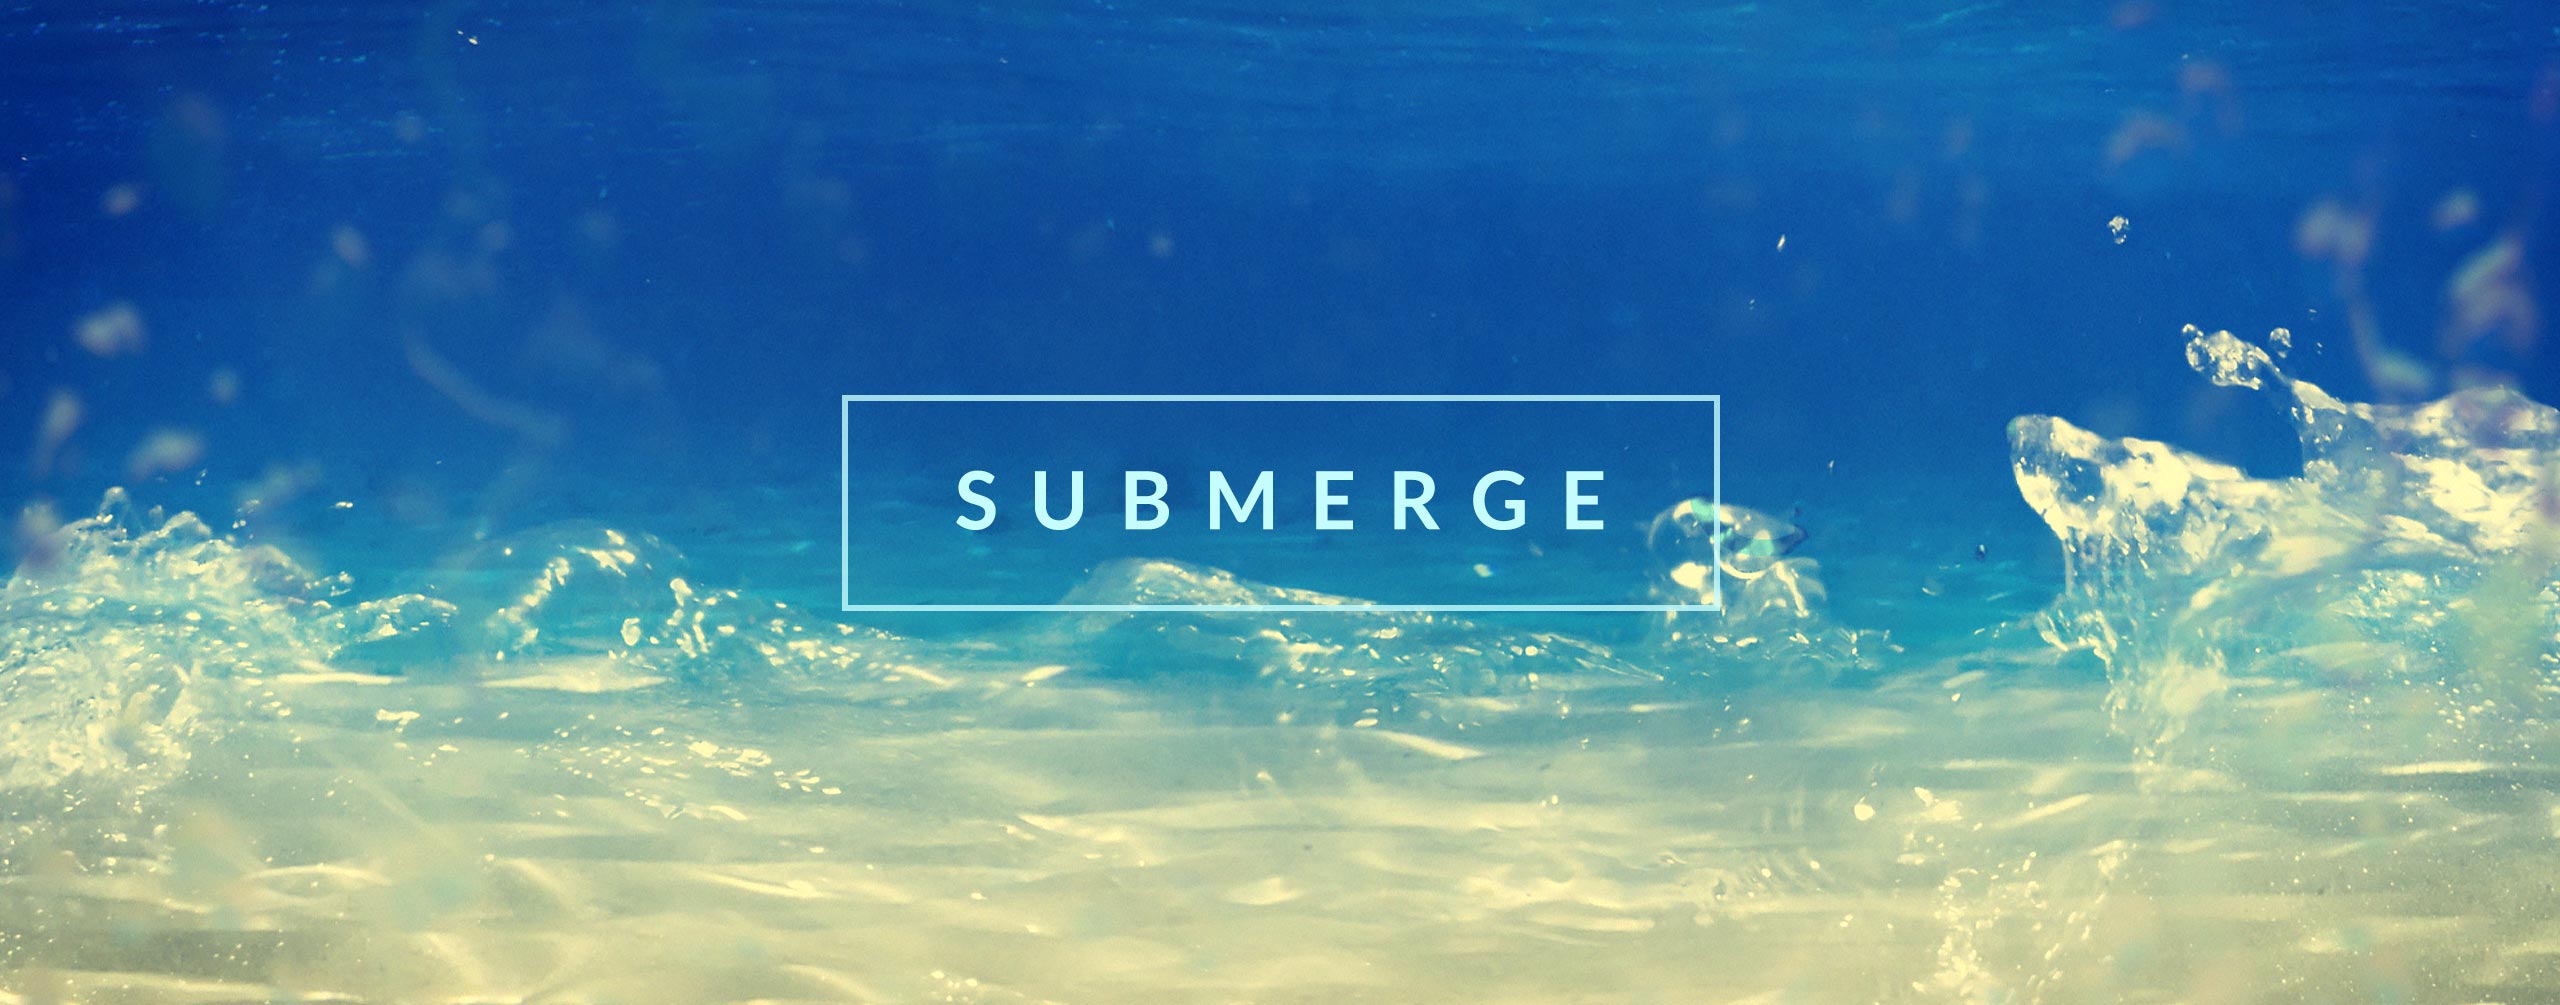 Submerge - Water and Rain Video Effects